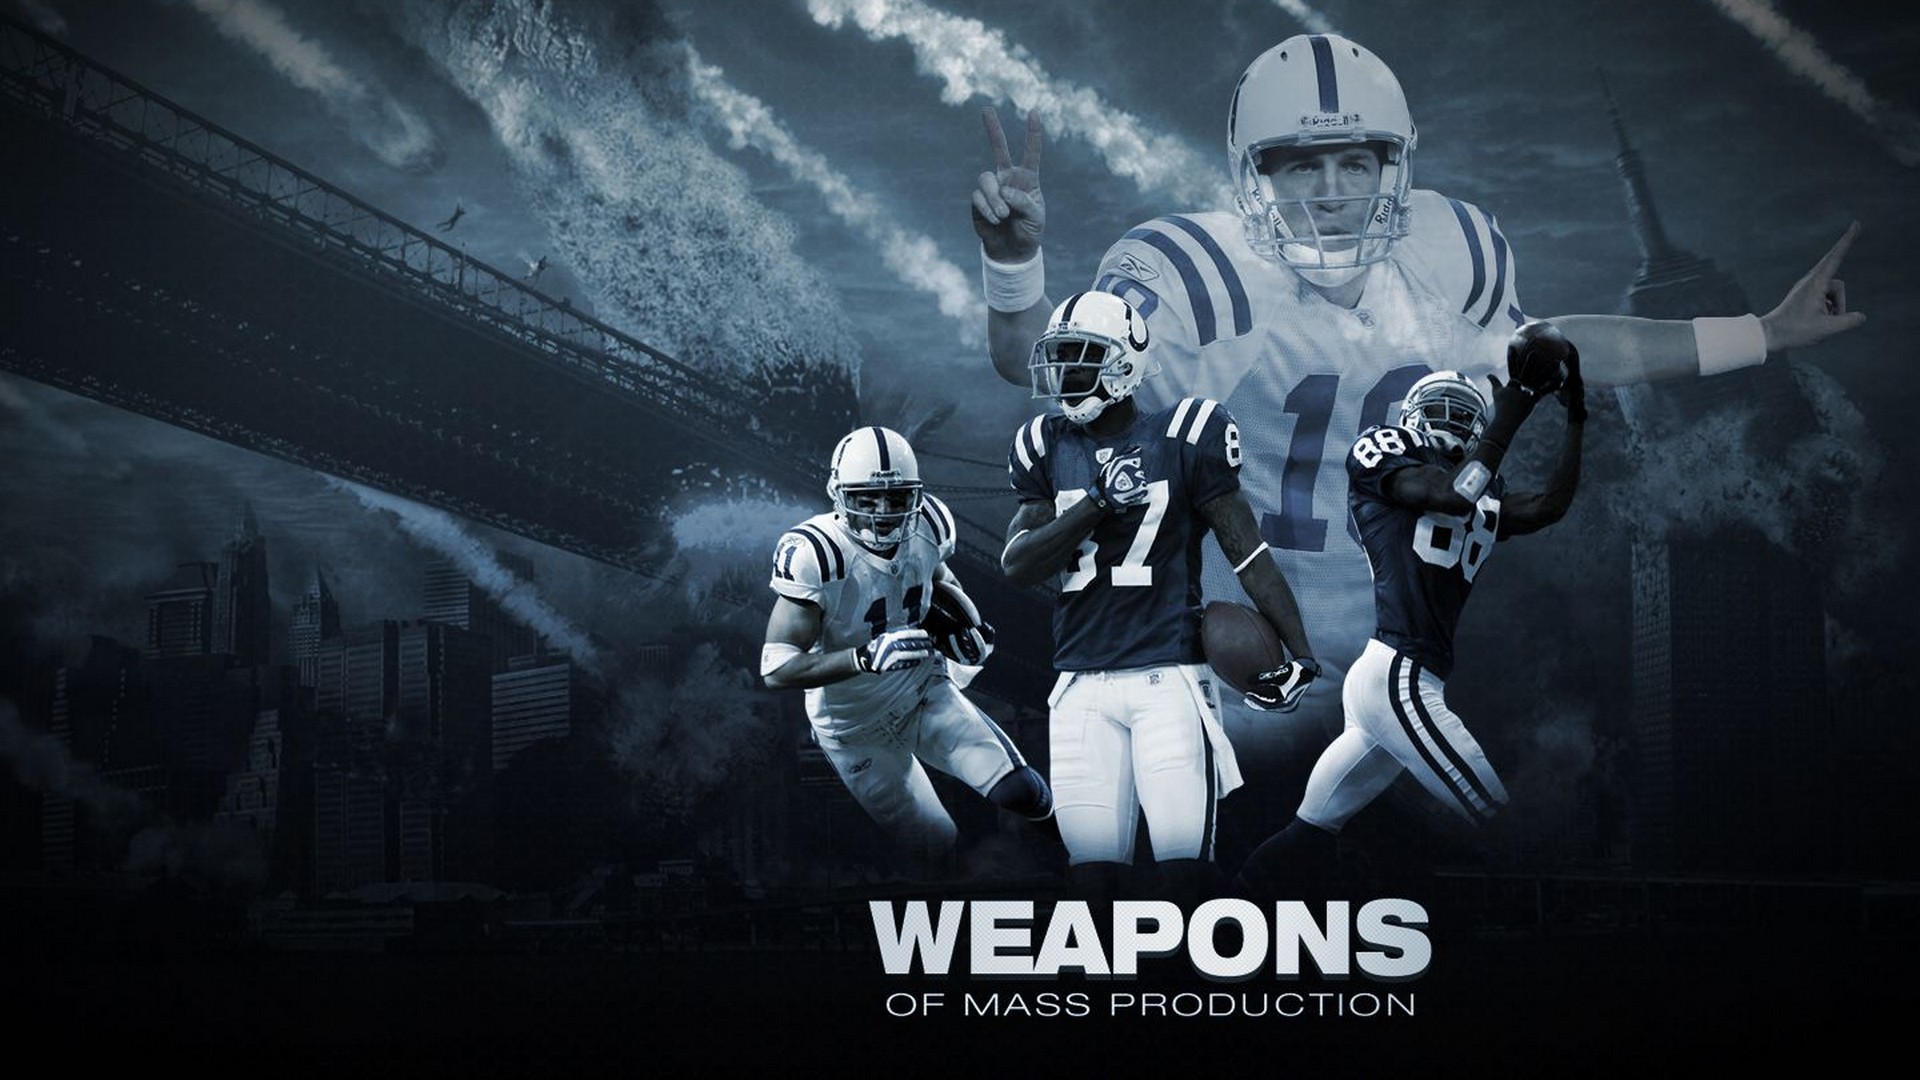 Wallpaper Desktop Indianapolis Colts NFL HD With Resolution 1920X1080 pixel. You can make this wallpaper for your Mac or Windows Desktop Background, iPhone, Android or Tablet and another Smartphone device for free